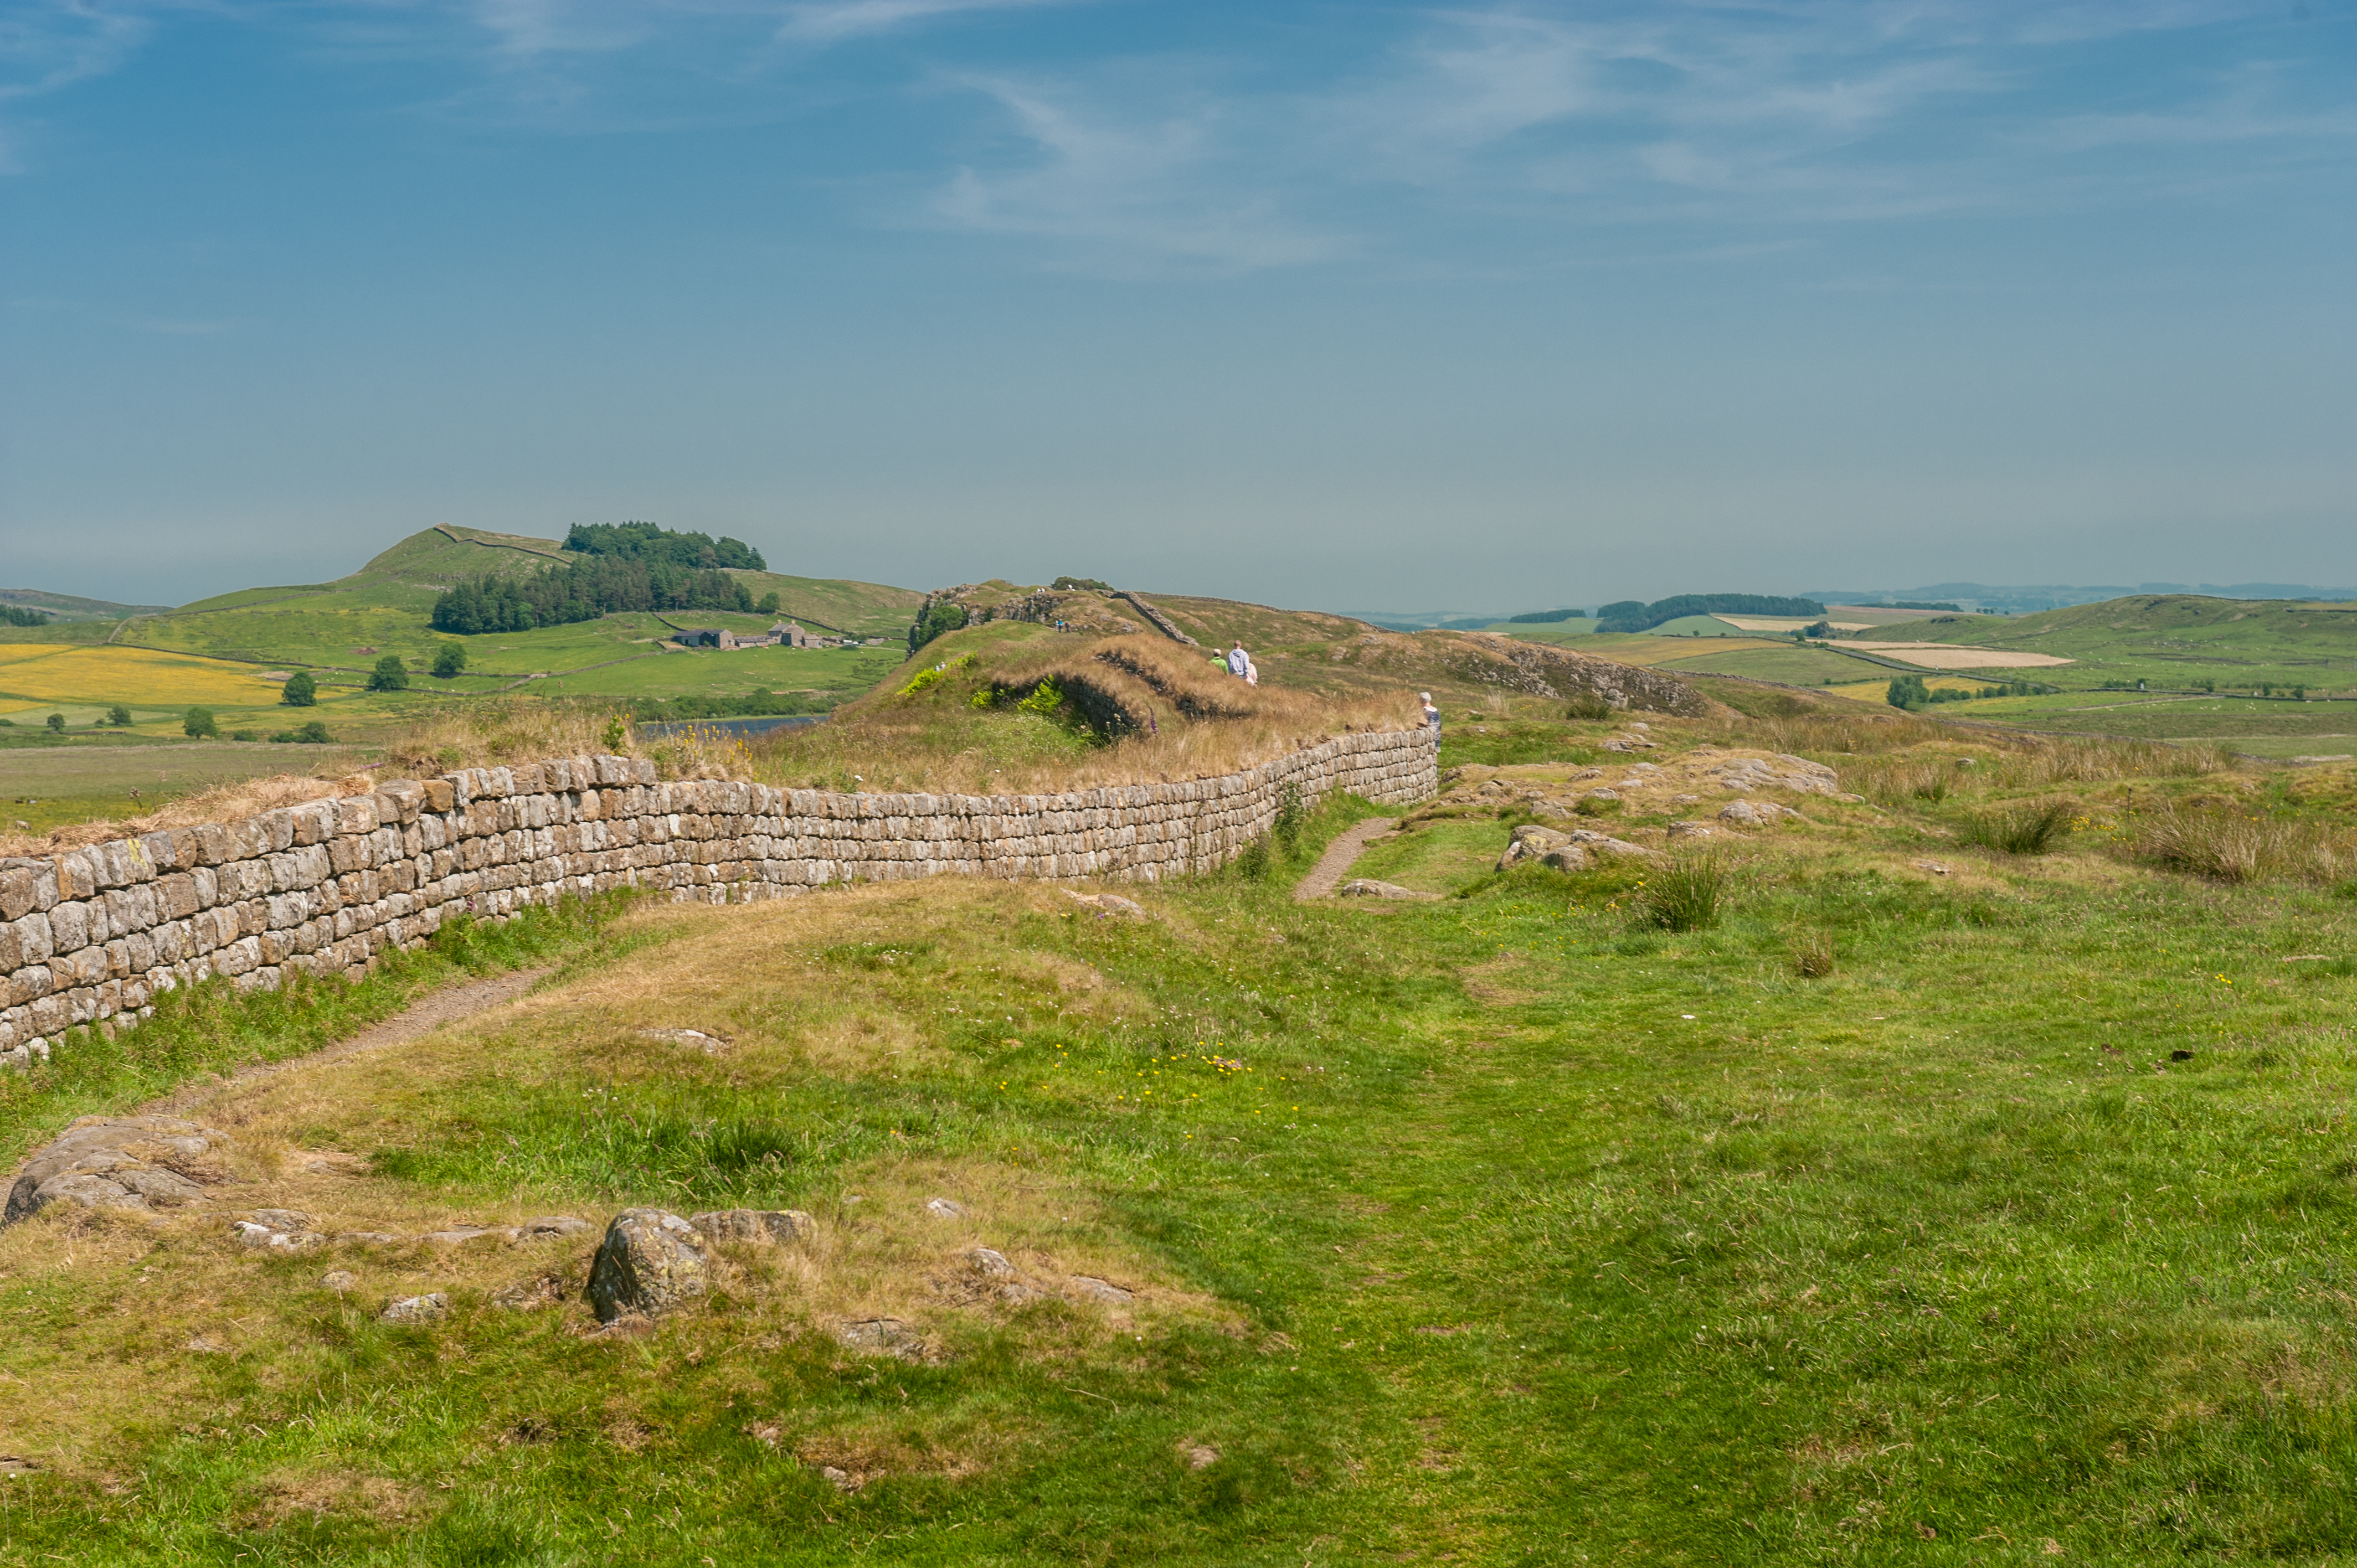 Roman Ruins in England, Wales, and Scotland - Hadrian's Wall